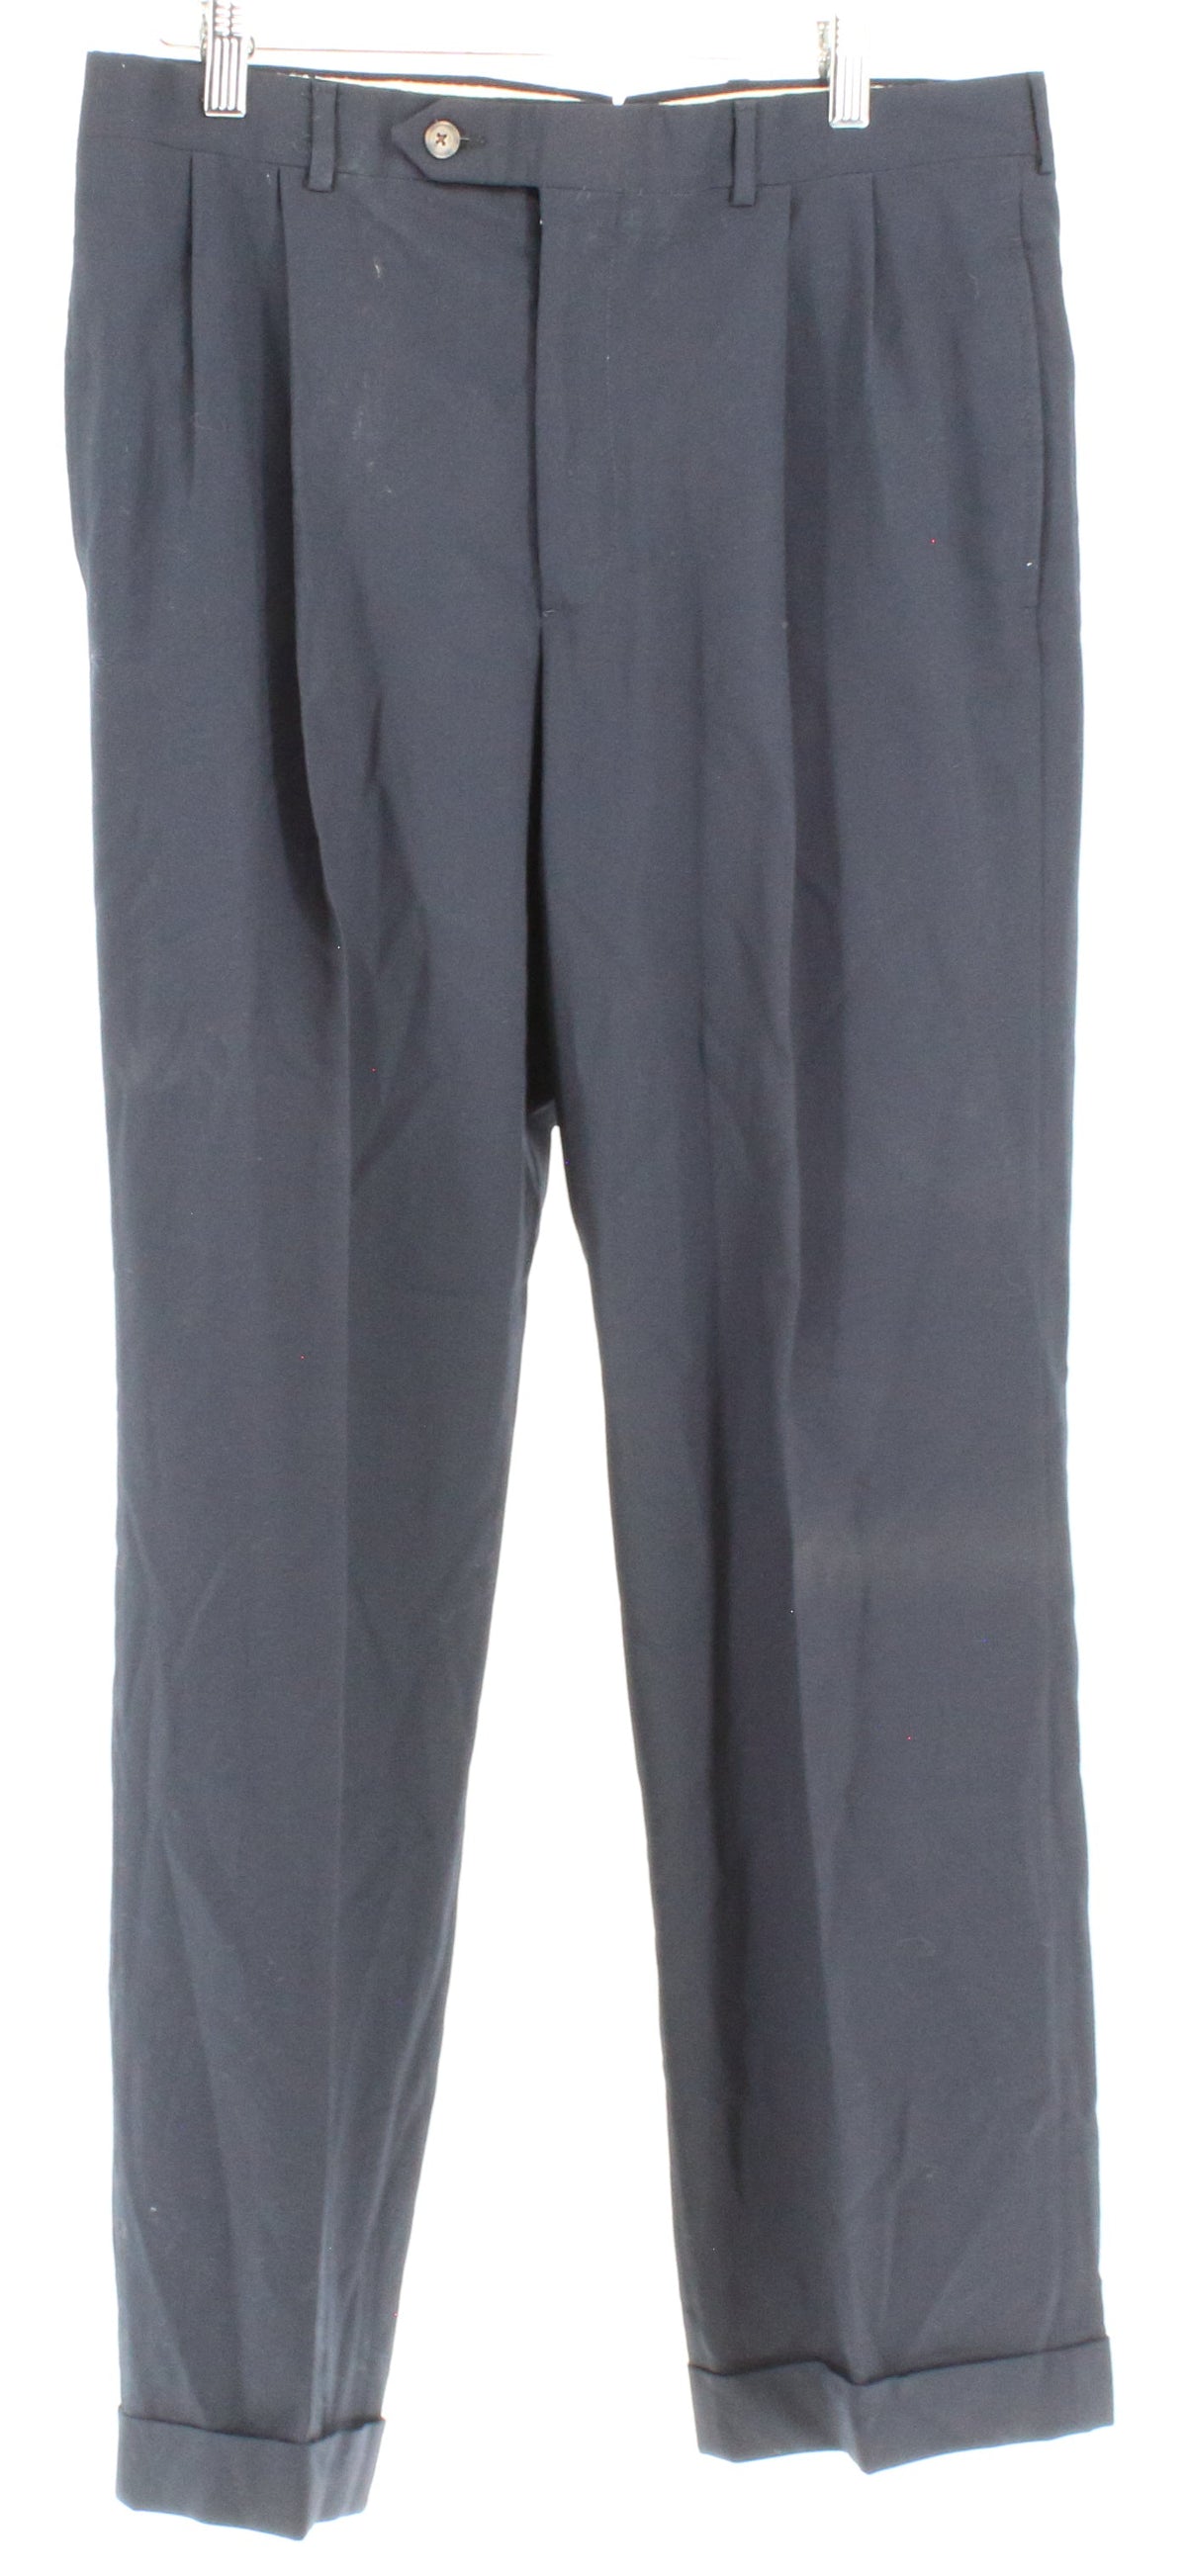 Macneil And Purnell By Corbin Navy Blue Trouser Pants